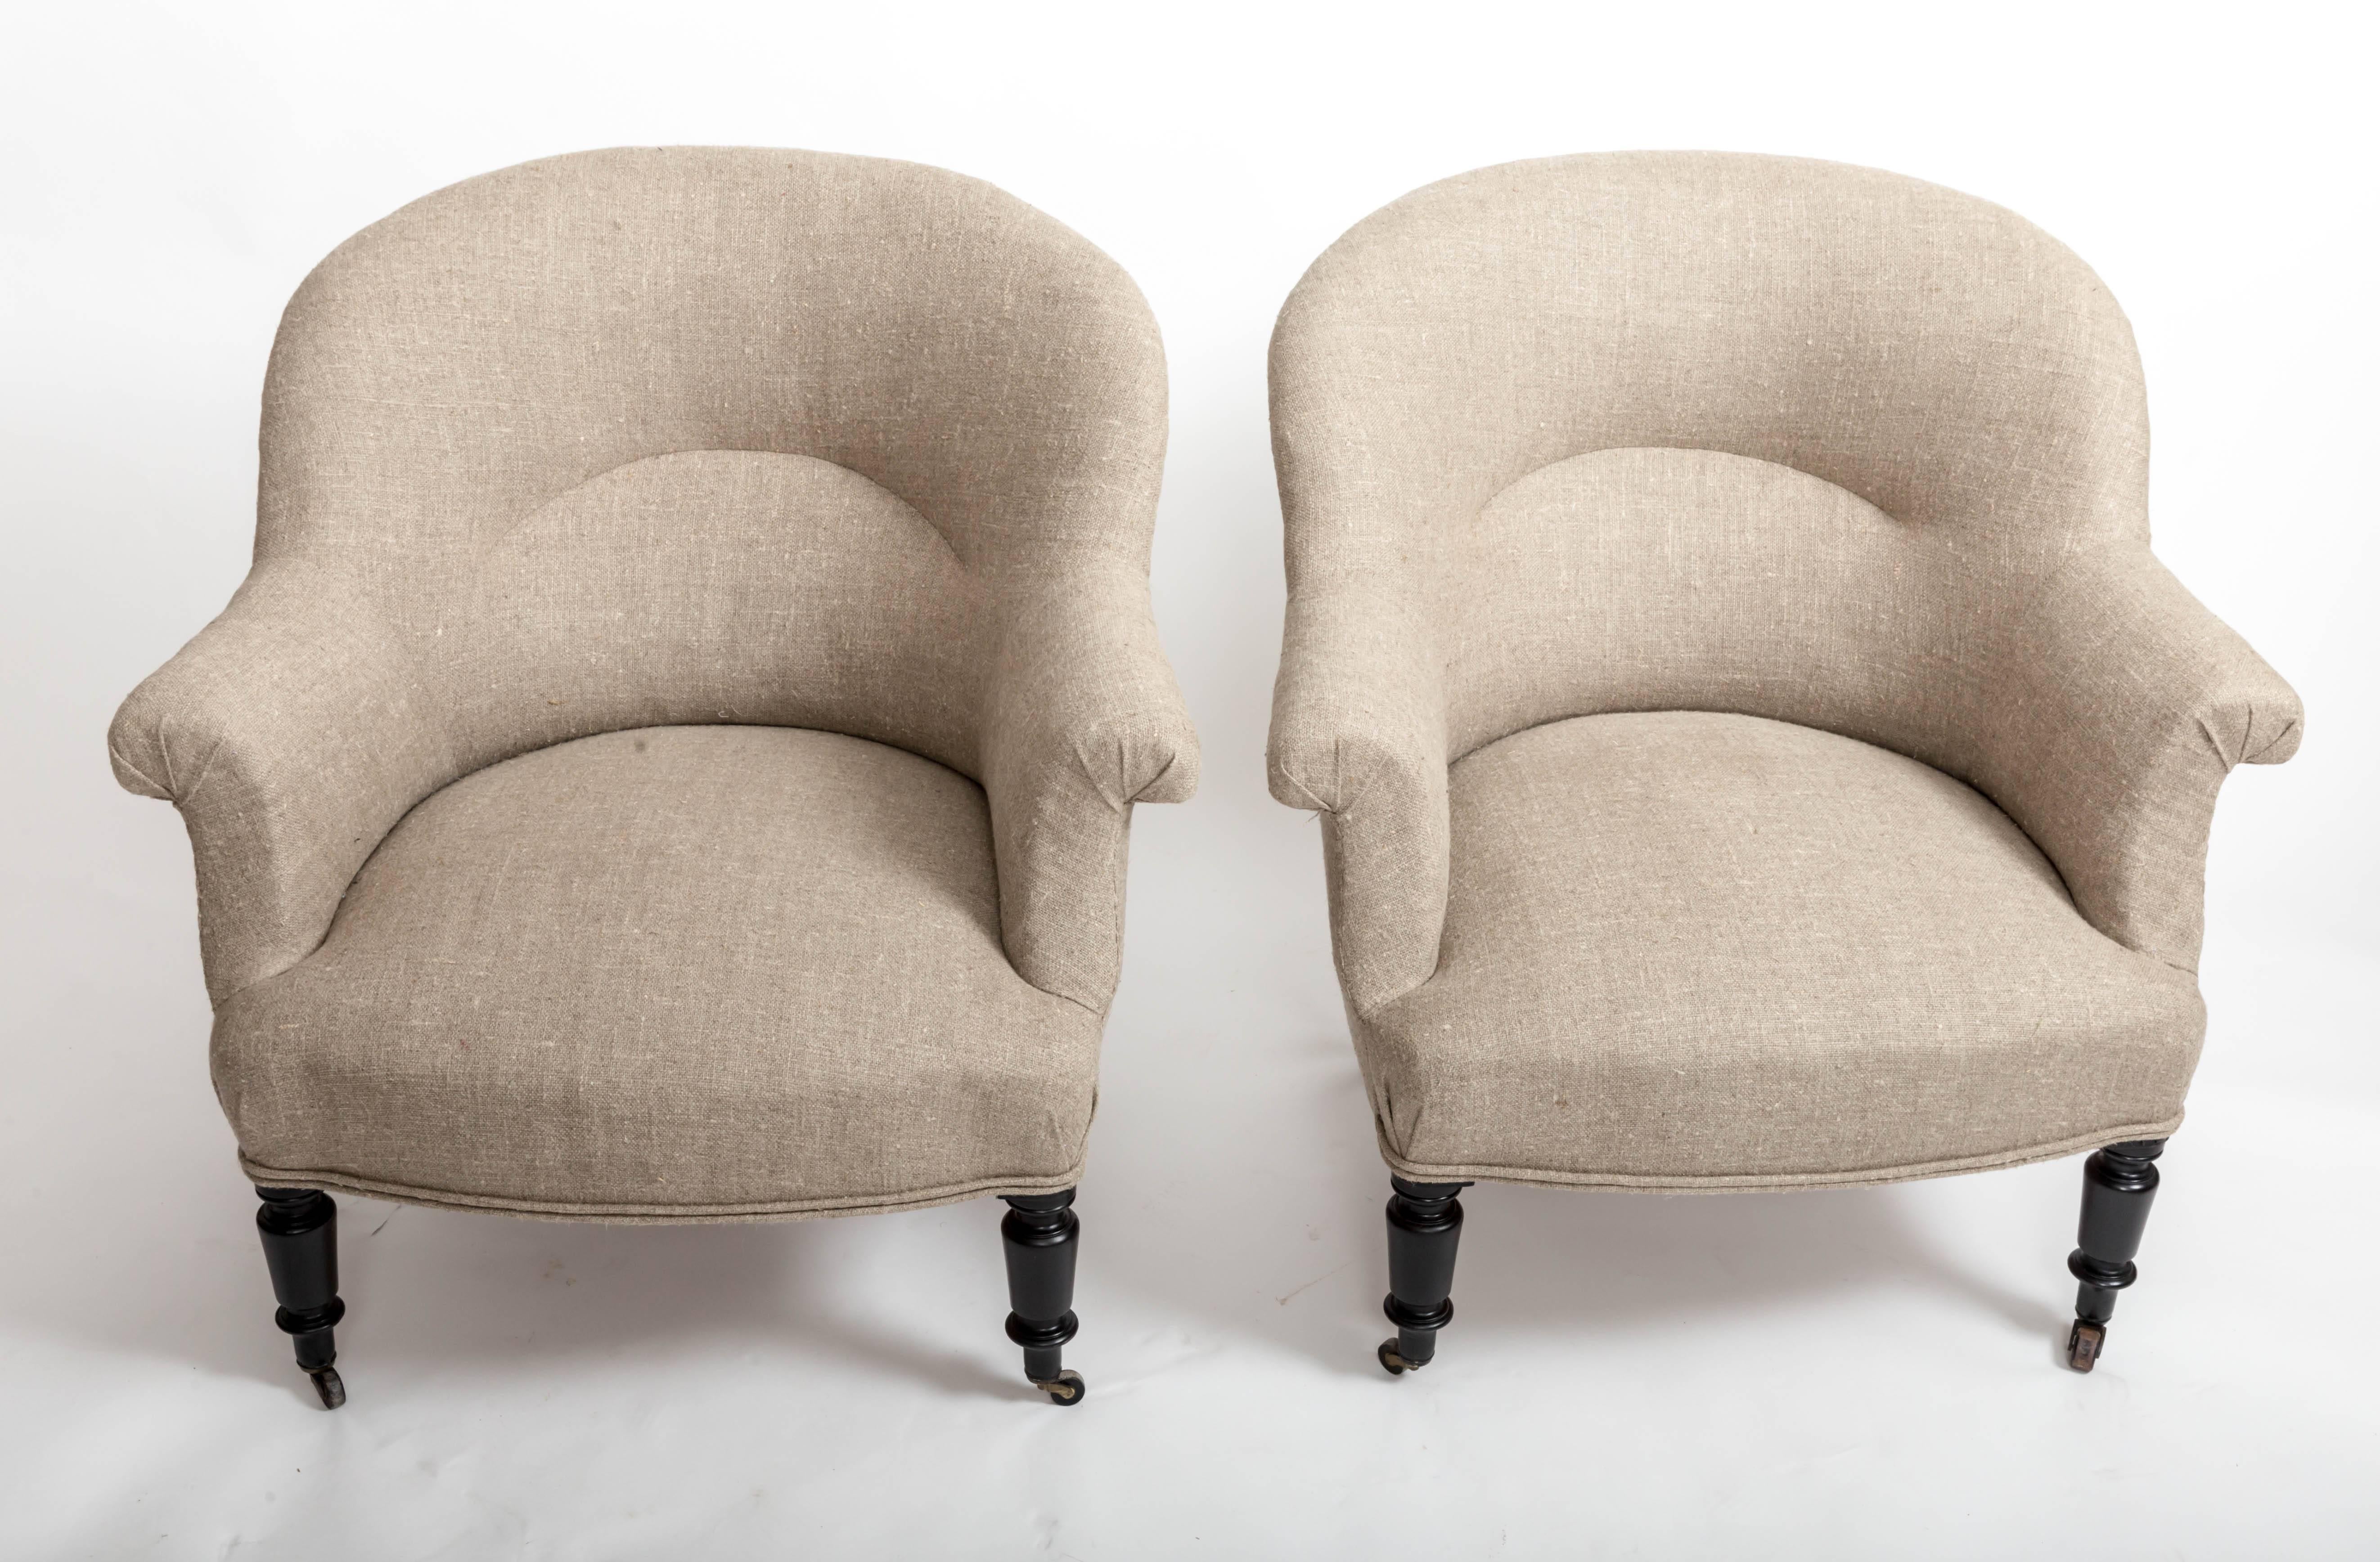 Pair of 19th century tub chairs with scrolled arms and newly upholstered in oatmeal colored French linen with double-welting sitting on ebonized turned front legs and splayed rear legs, both legs with casters.